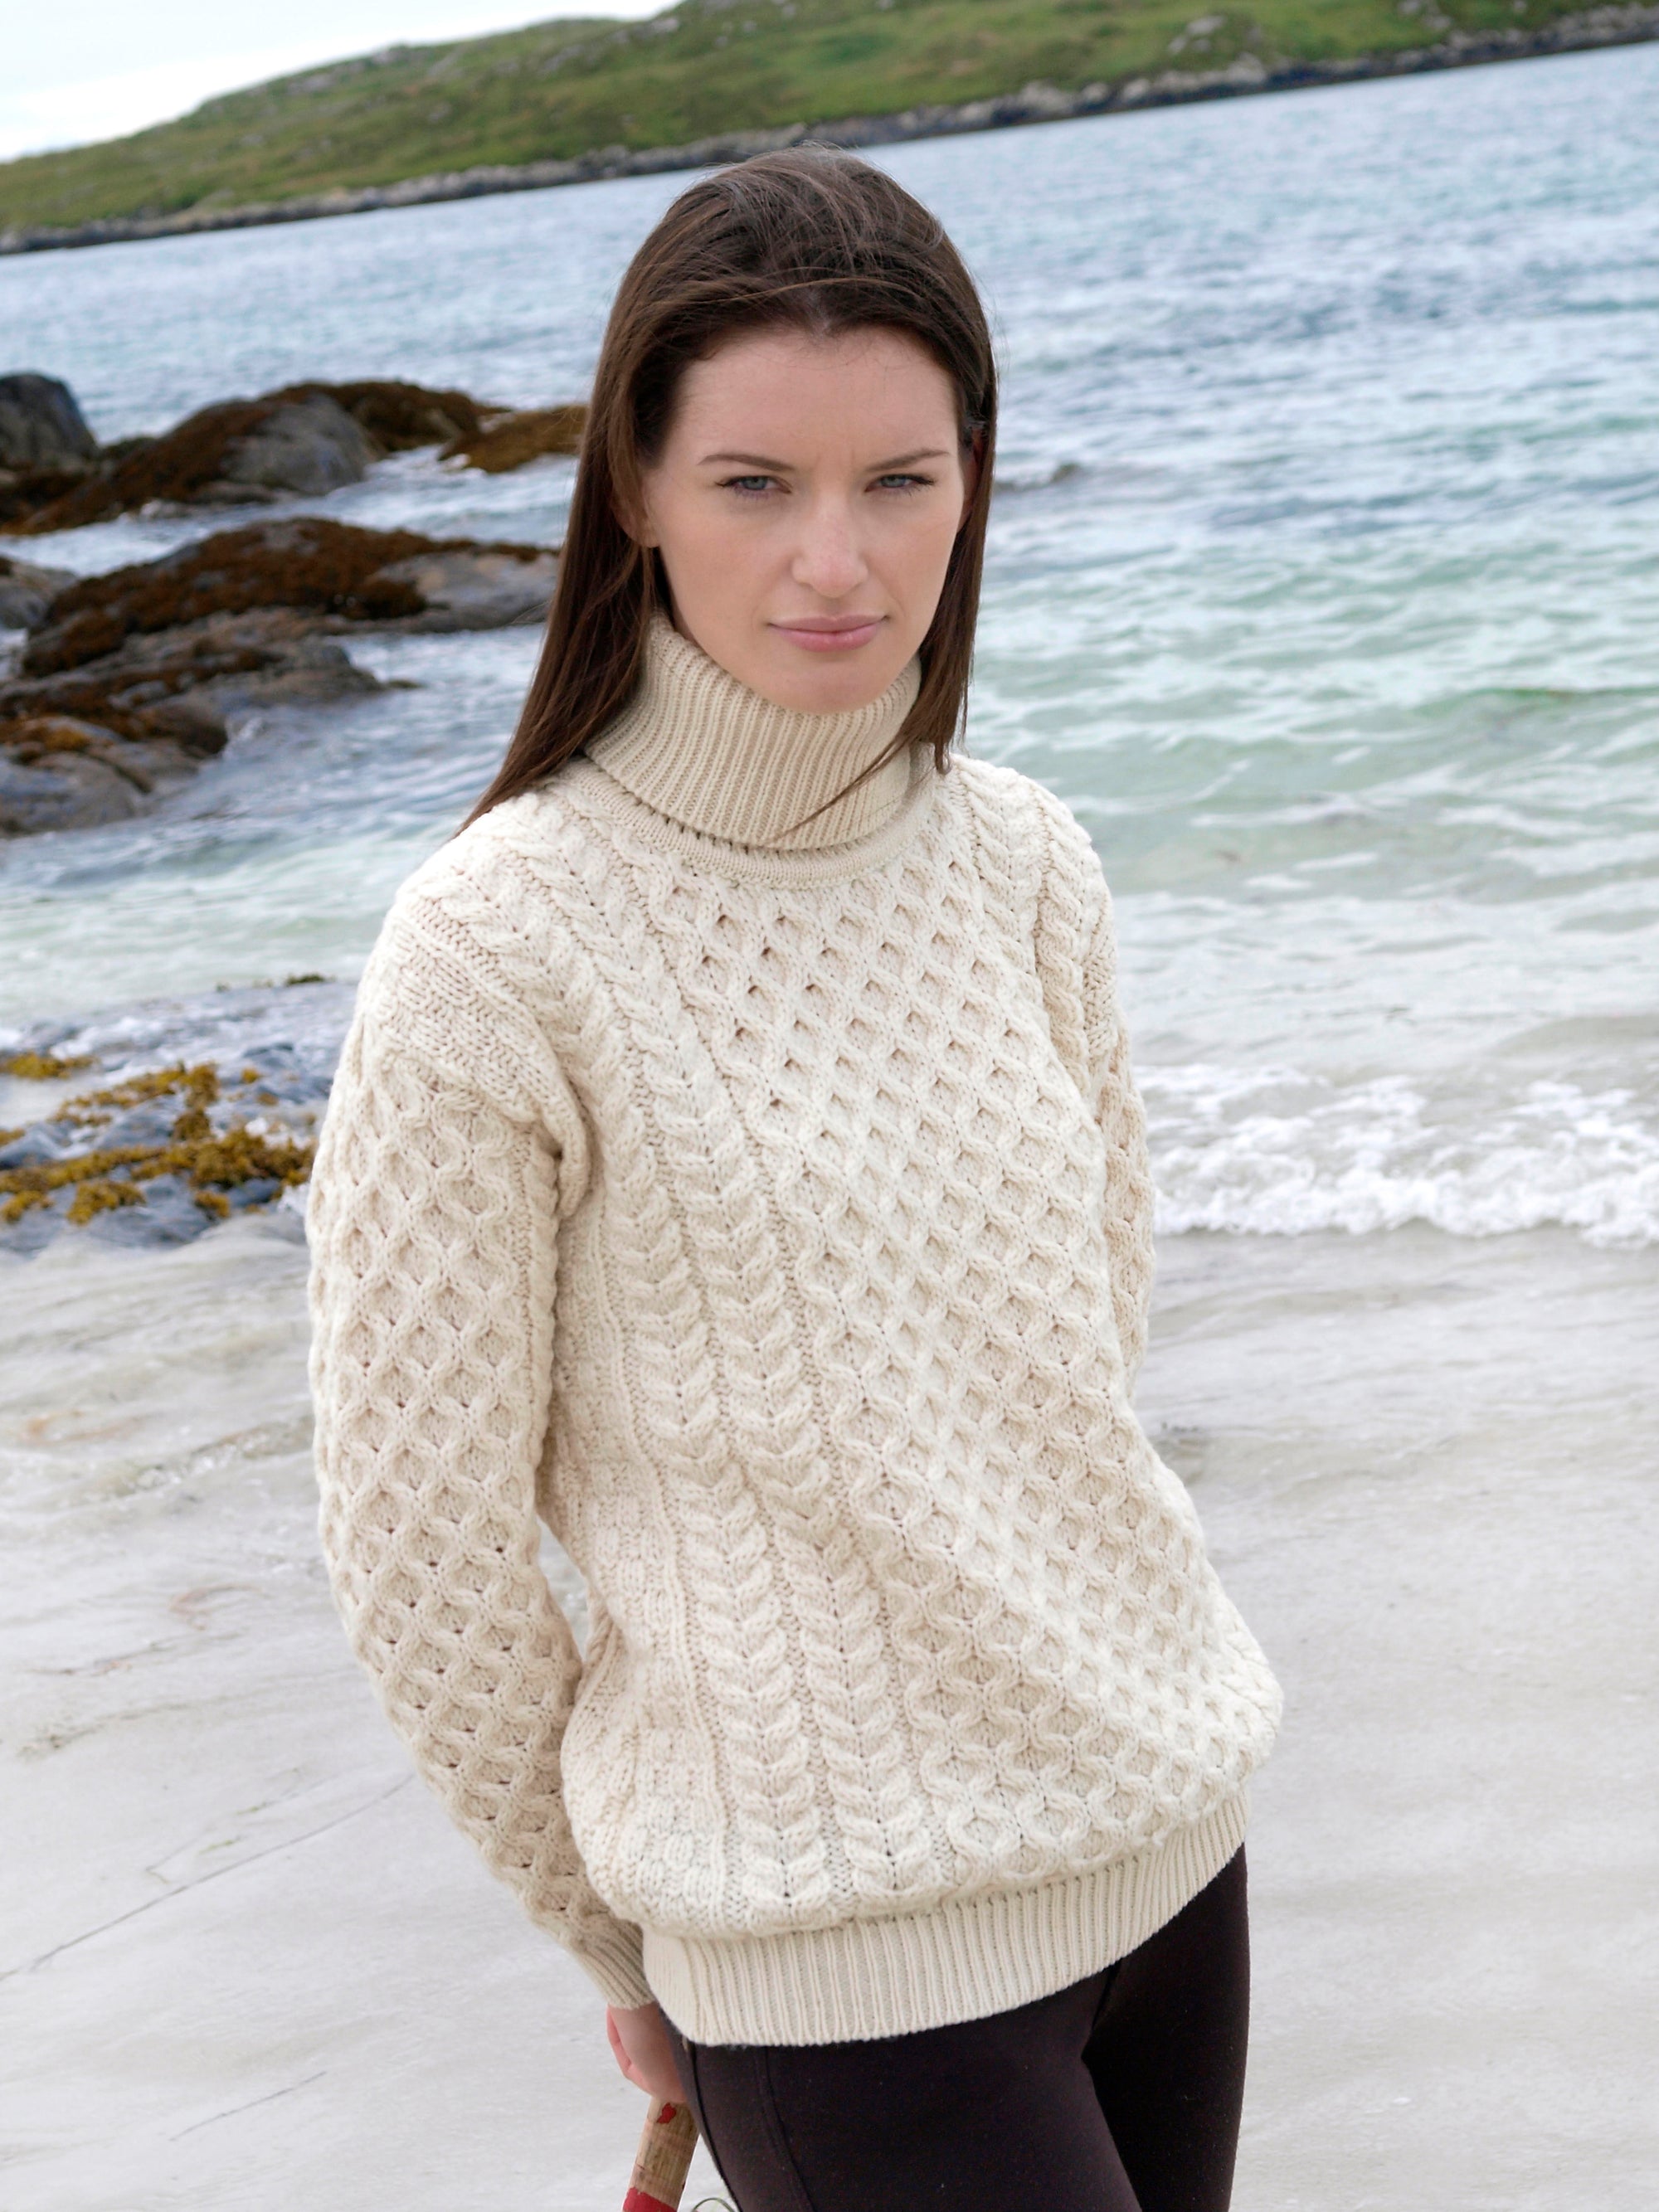 CULTURAL FACTS ABOUT TURTLENECK ARAN SWEATERS FROM IRELAND